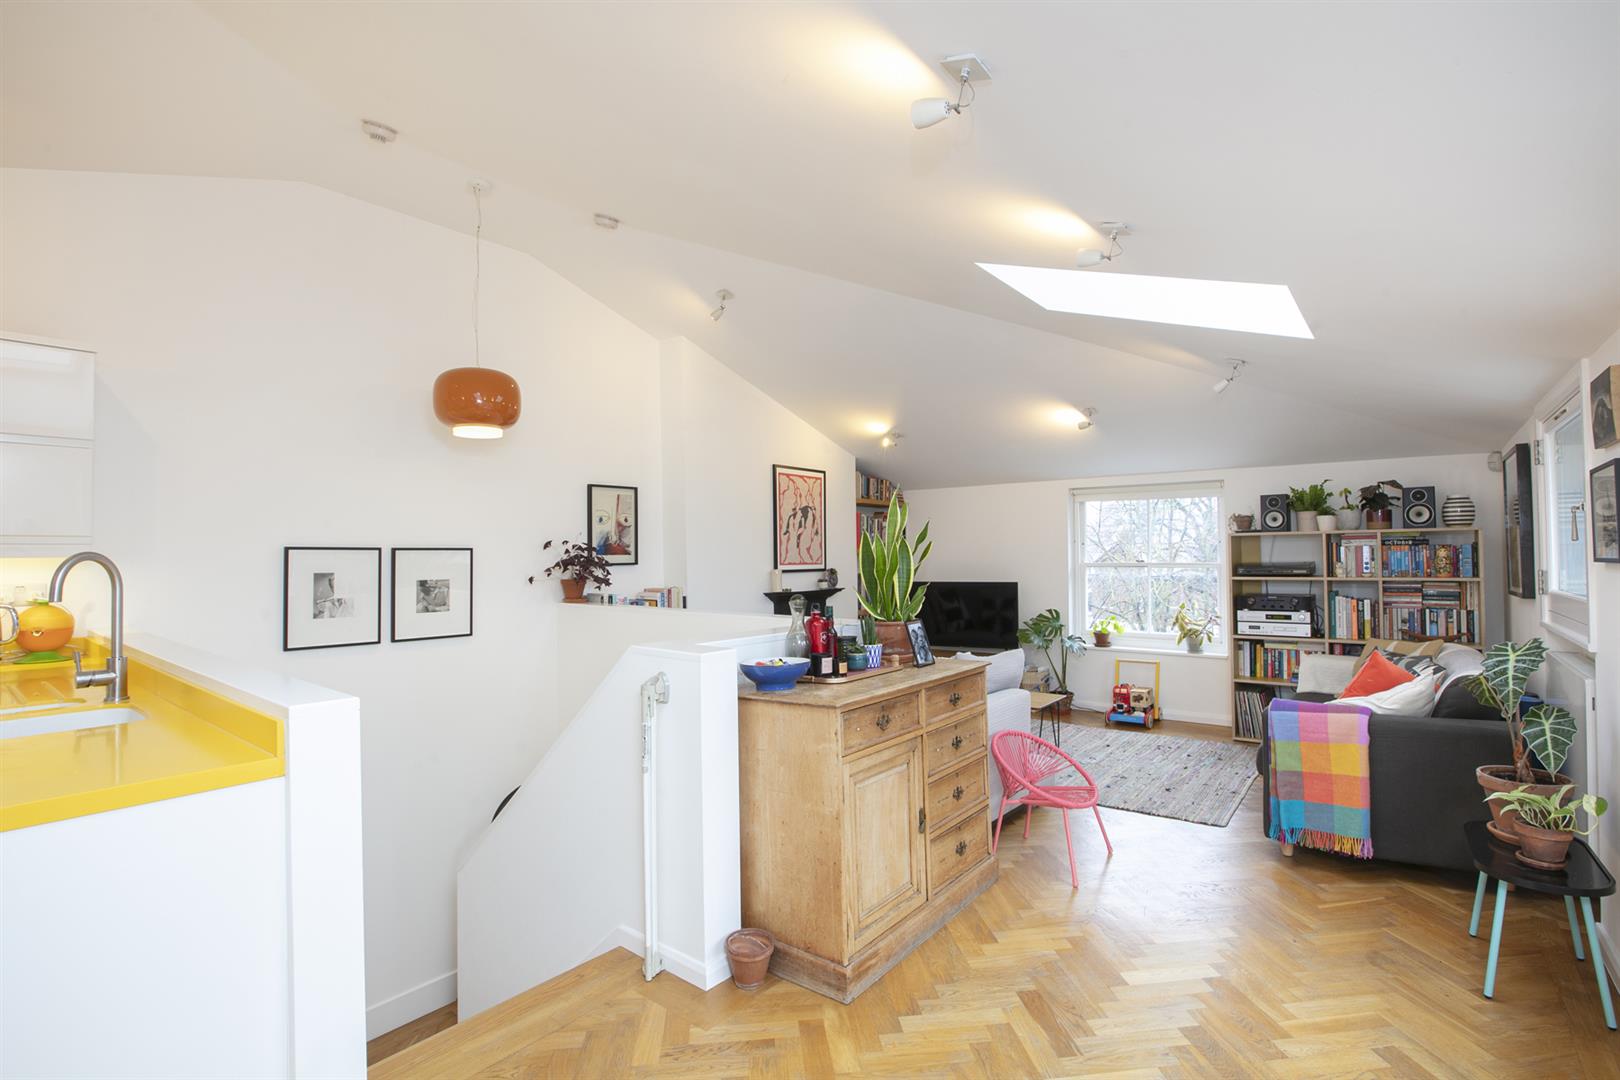 Flat - Conversion For Sale in Holly Grove, Peckham, SE15 893 view12